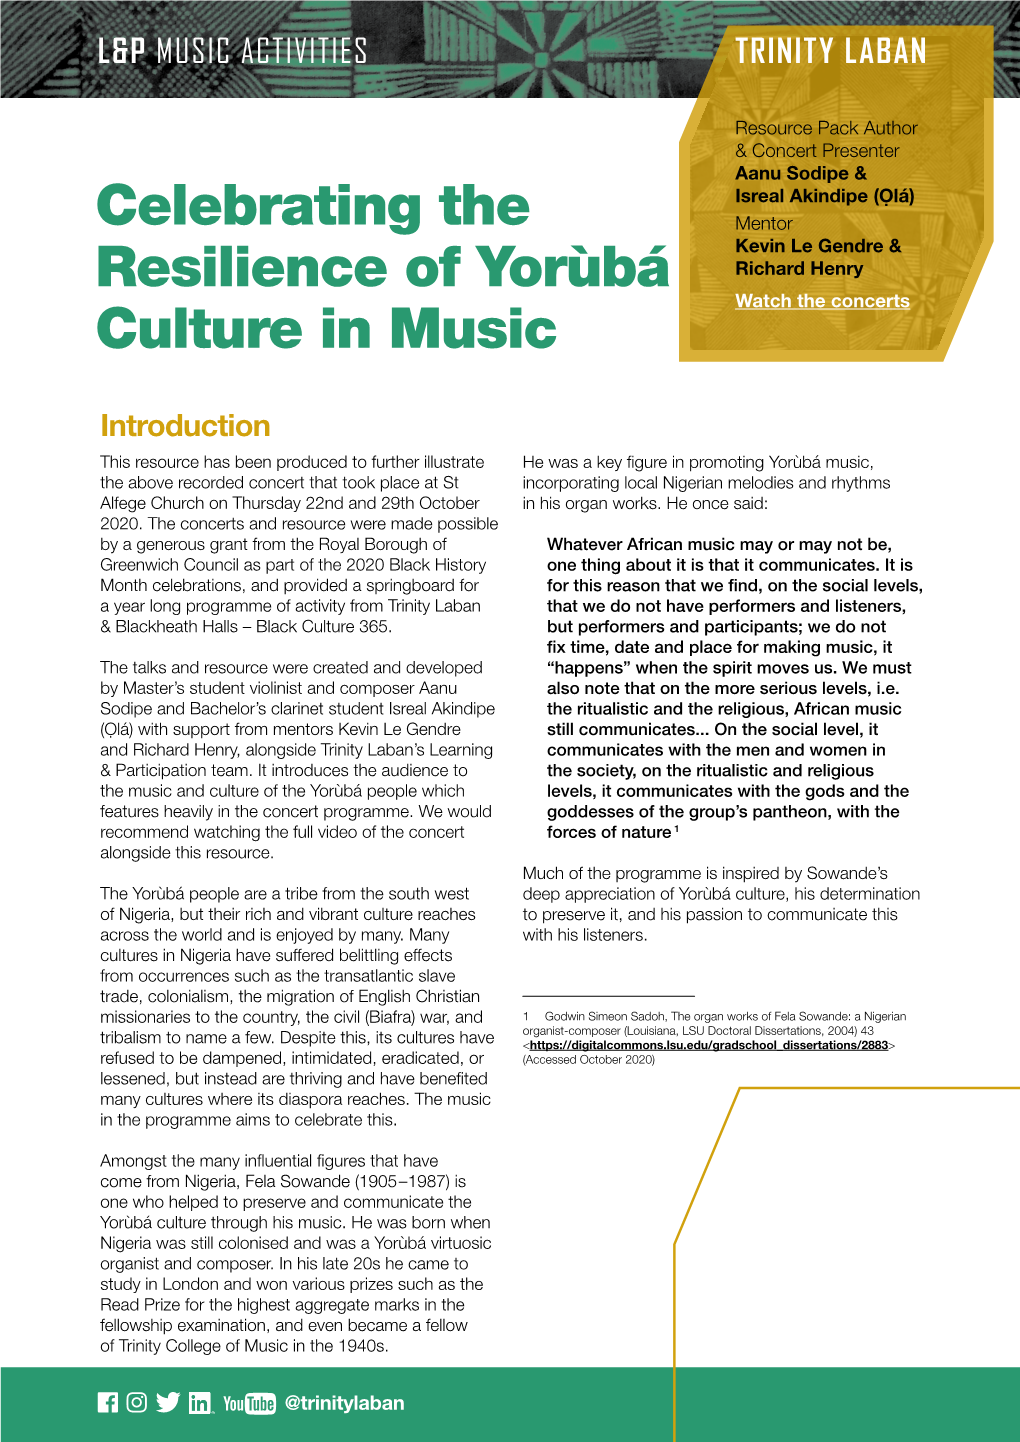 Celebrating the Resilience of Yorùbá Culture in Music